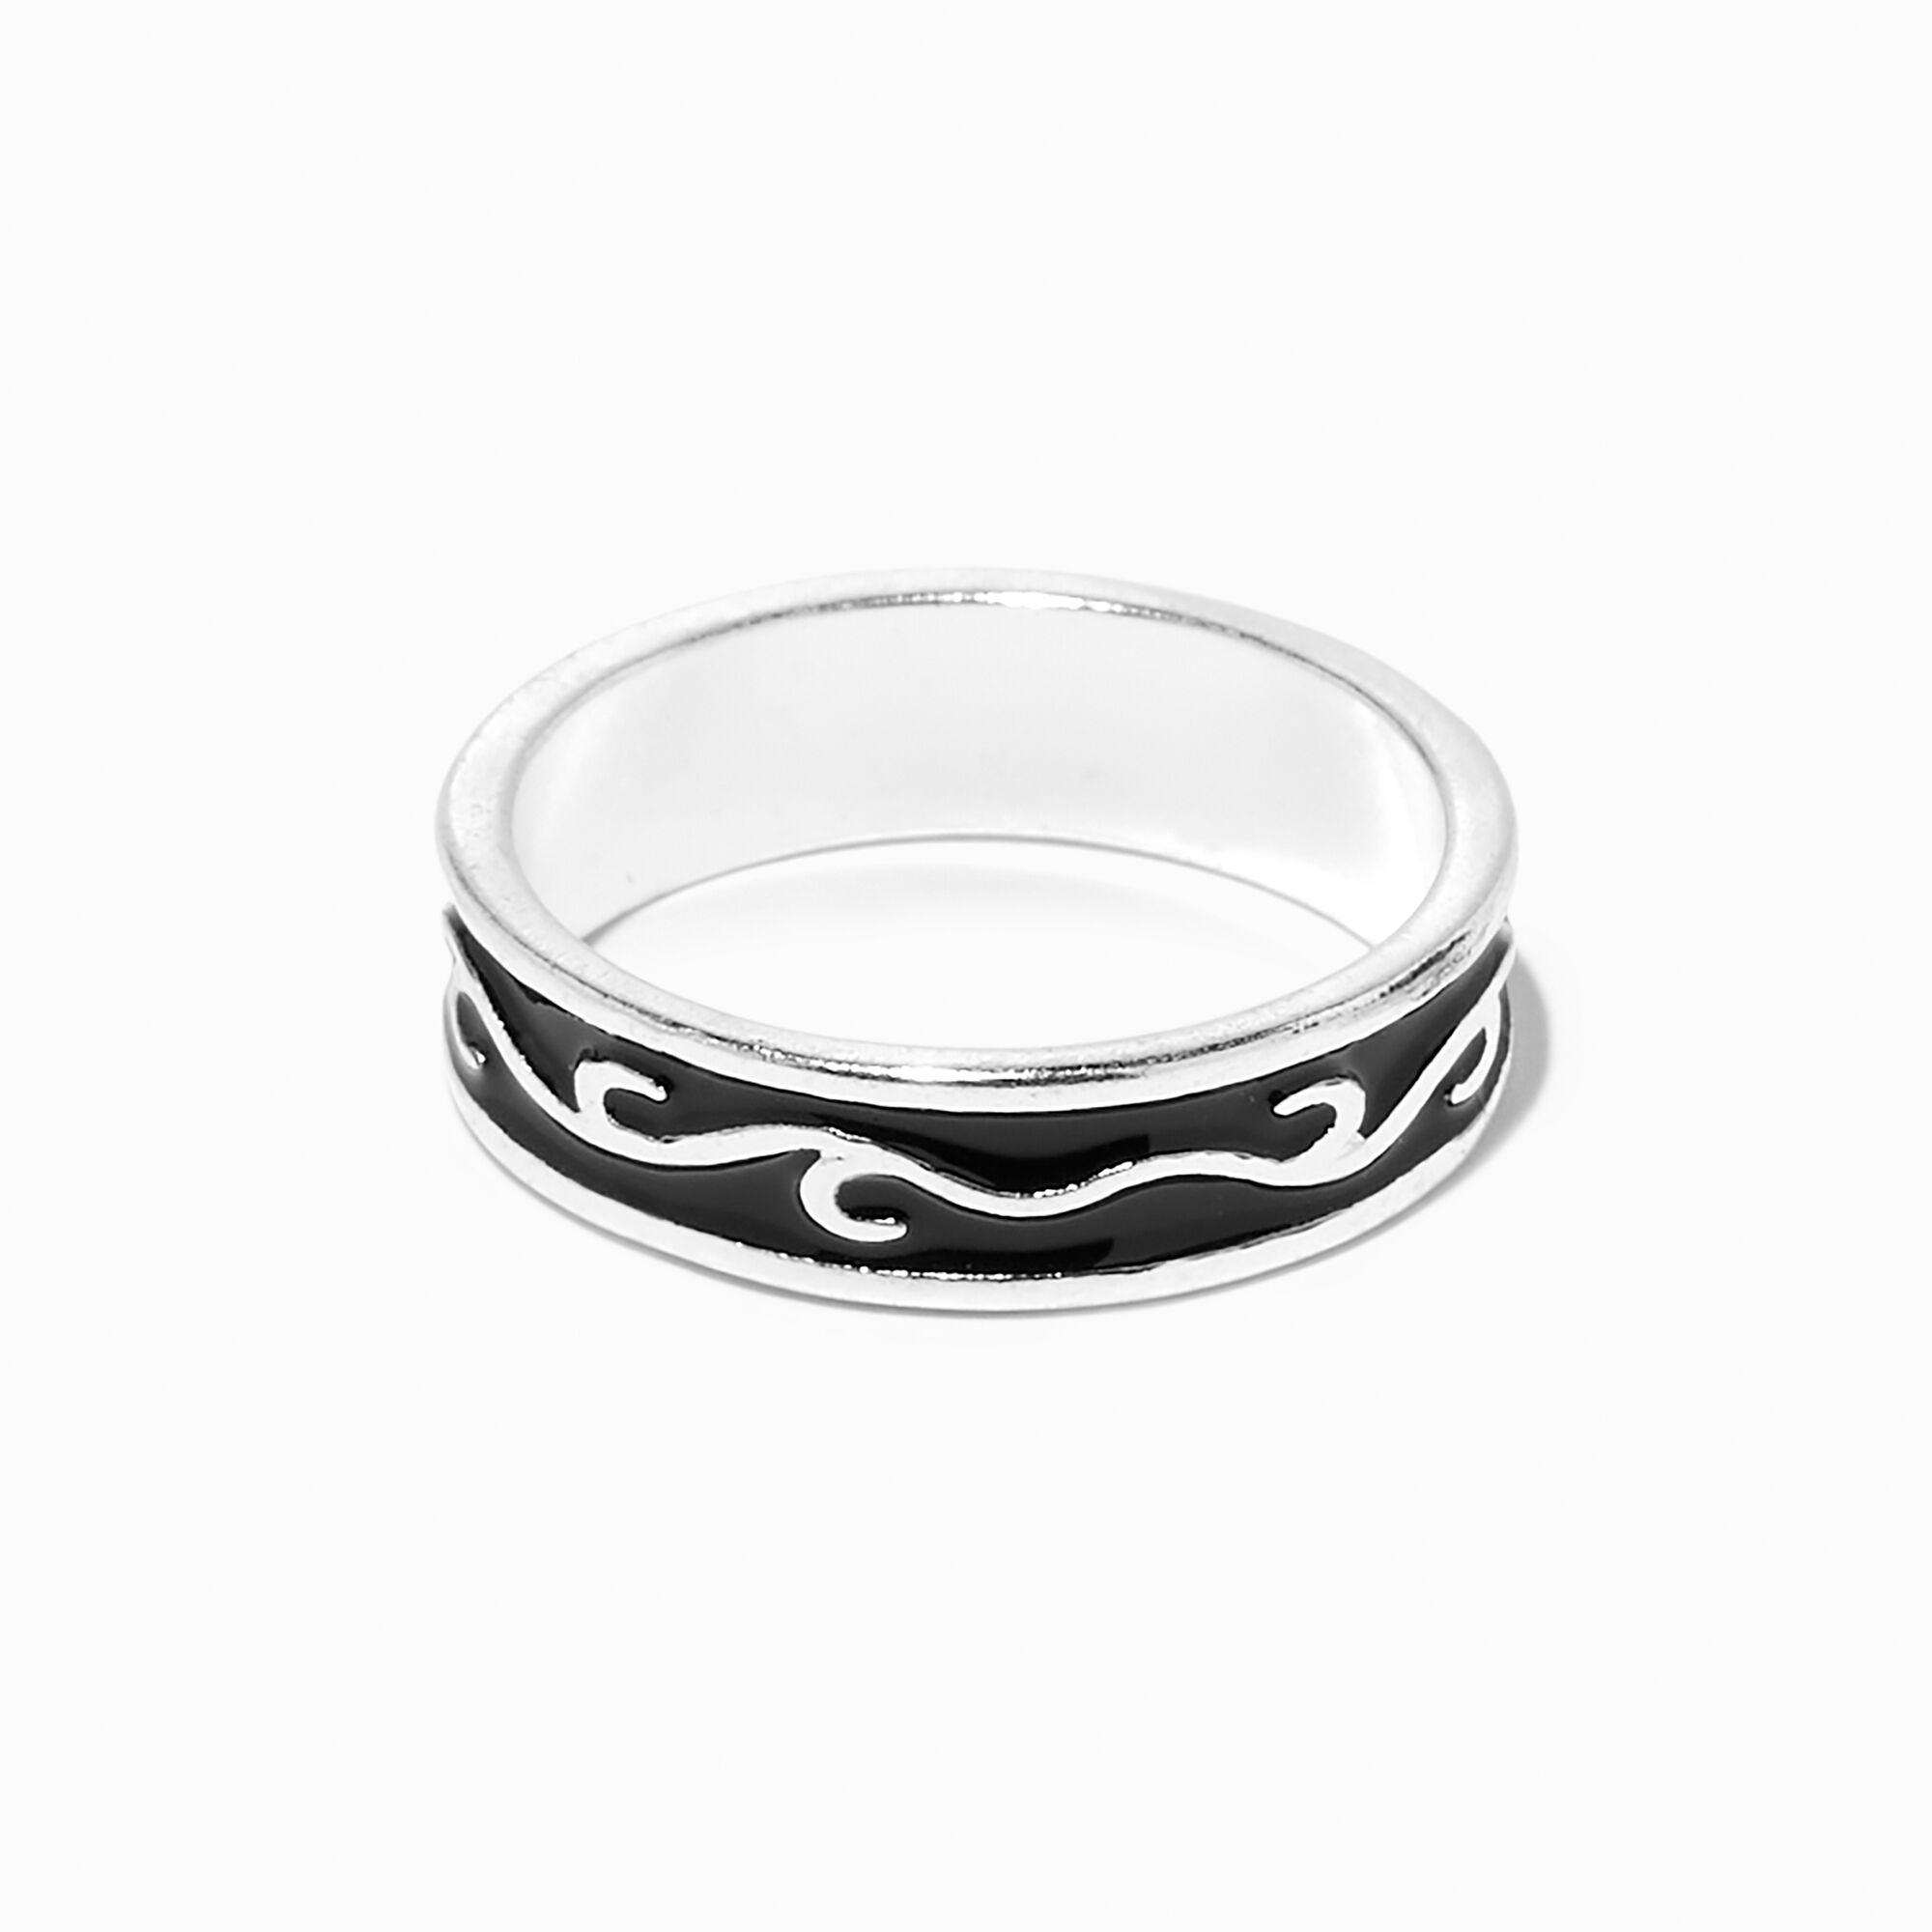 View Claires SilverTone Enamel Flame Ring Black information